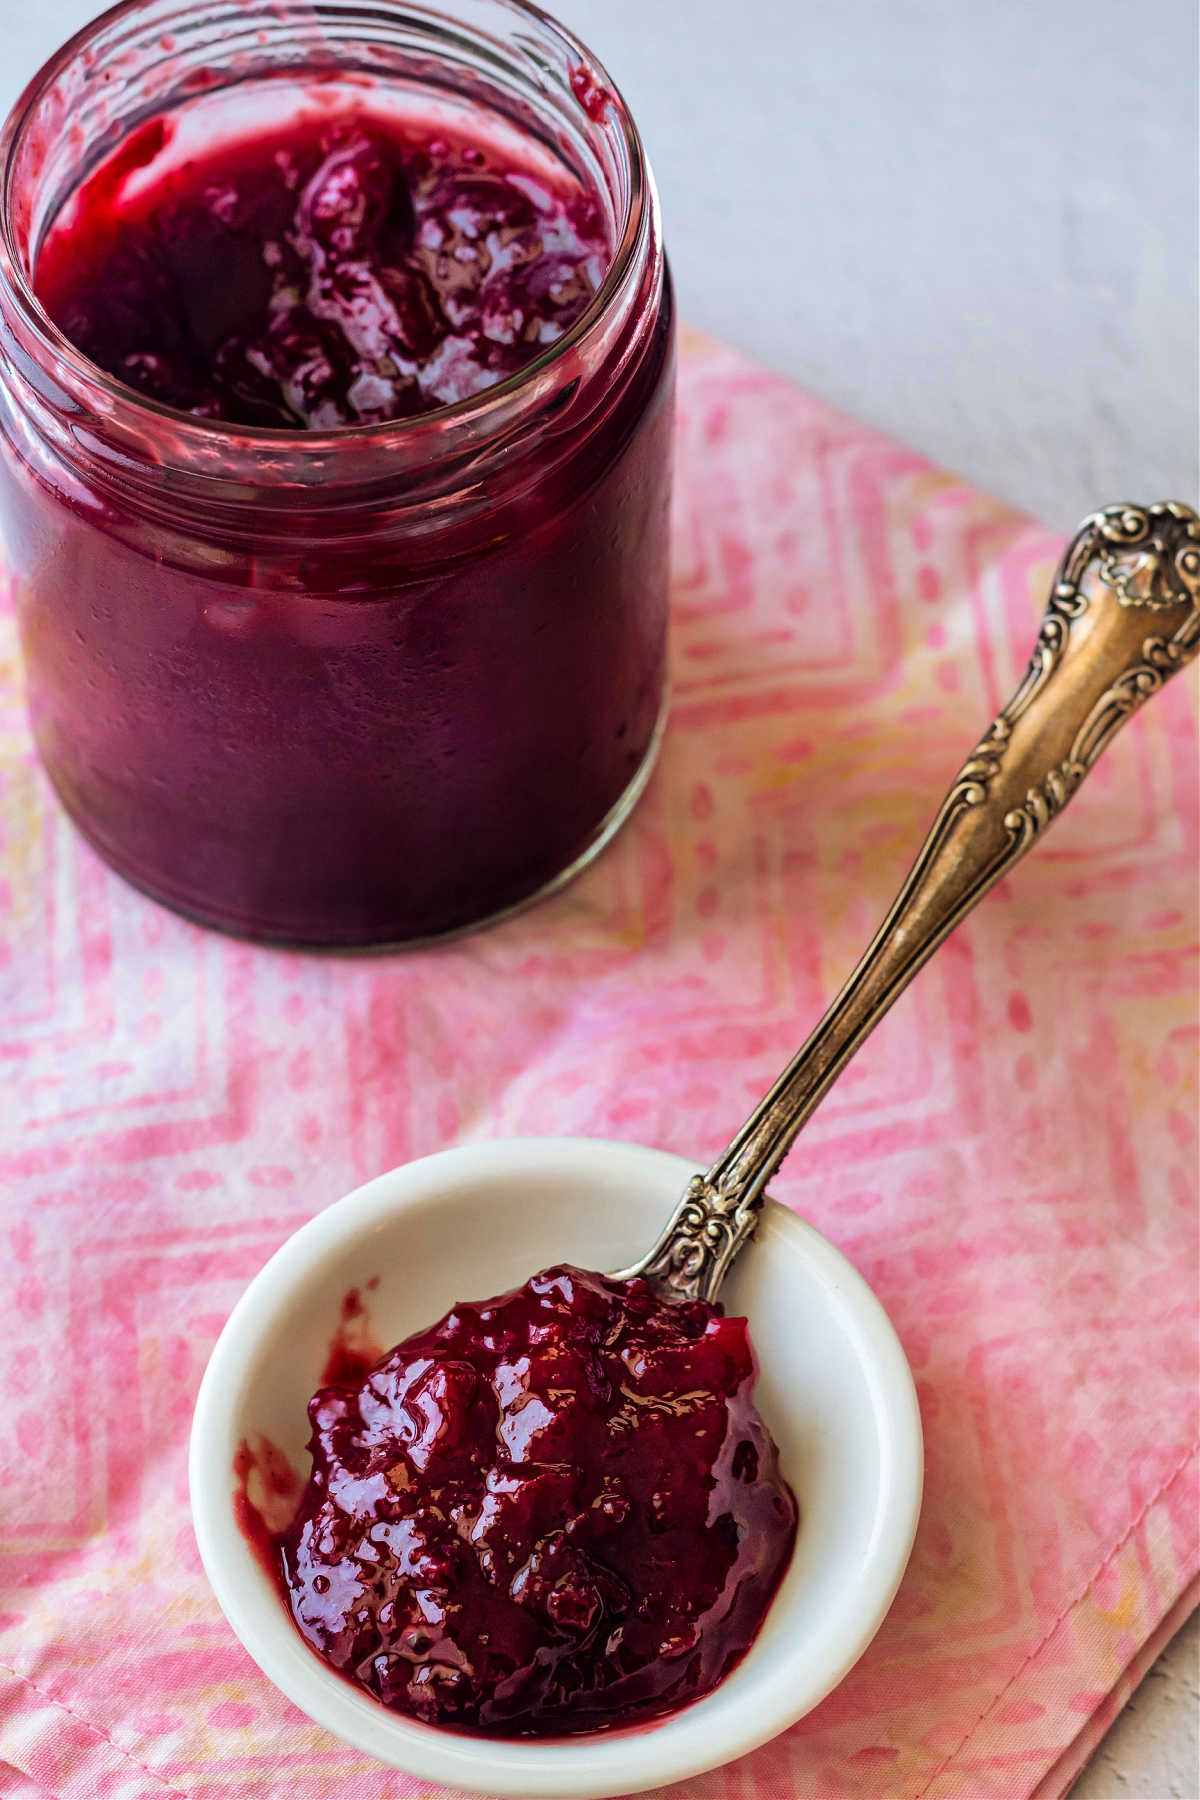 A jar of plum jam with a spoonful of the jam in a small white dish.